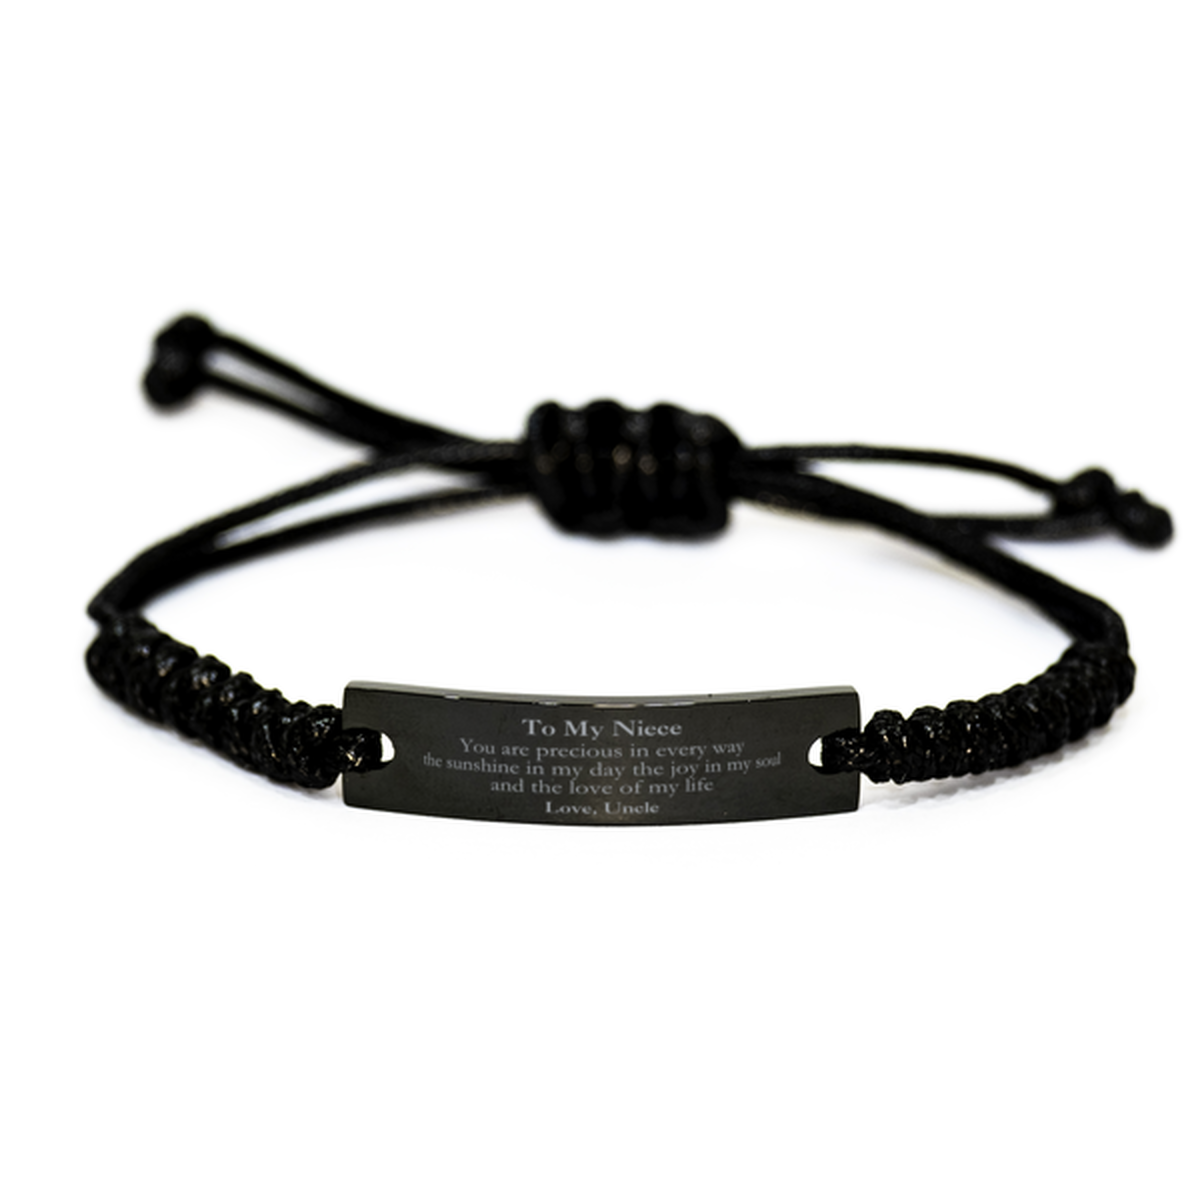 Graduation Gifts for Niece Black Rope Bracelet Present from Uncle, Christmas Niece Birthday Gifts Niece You are precious in every way the sunshine in my day. Love, Uncle